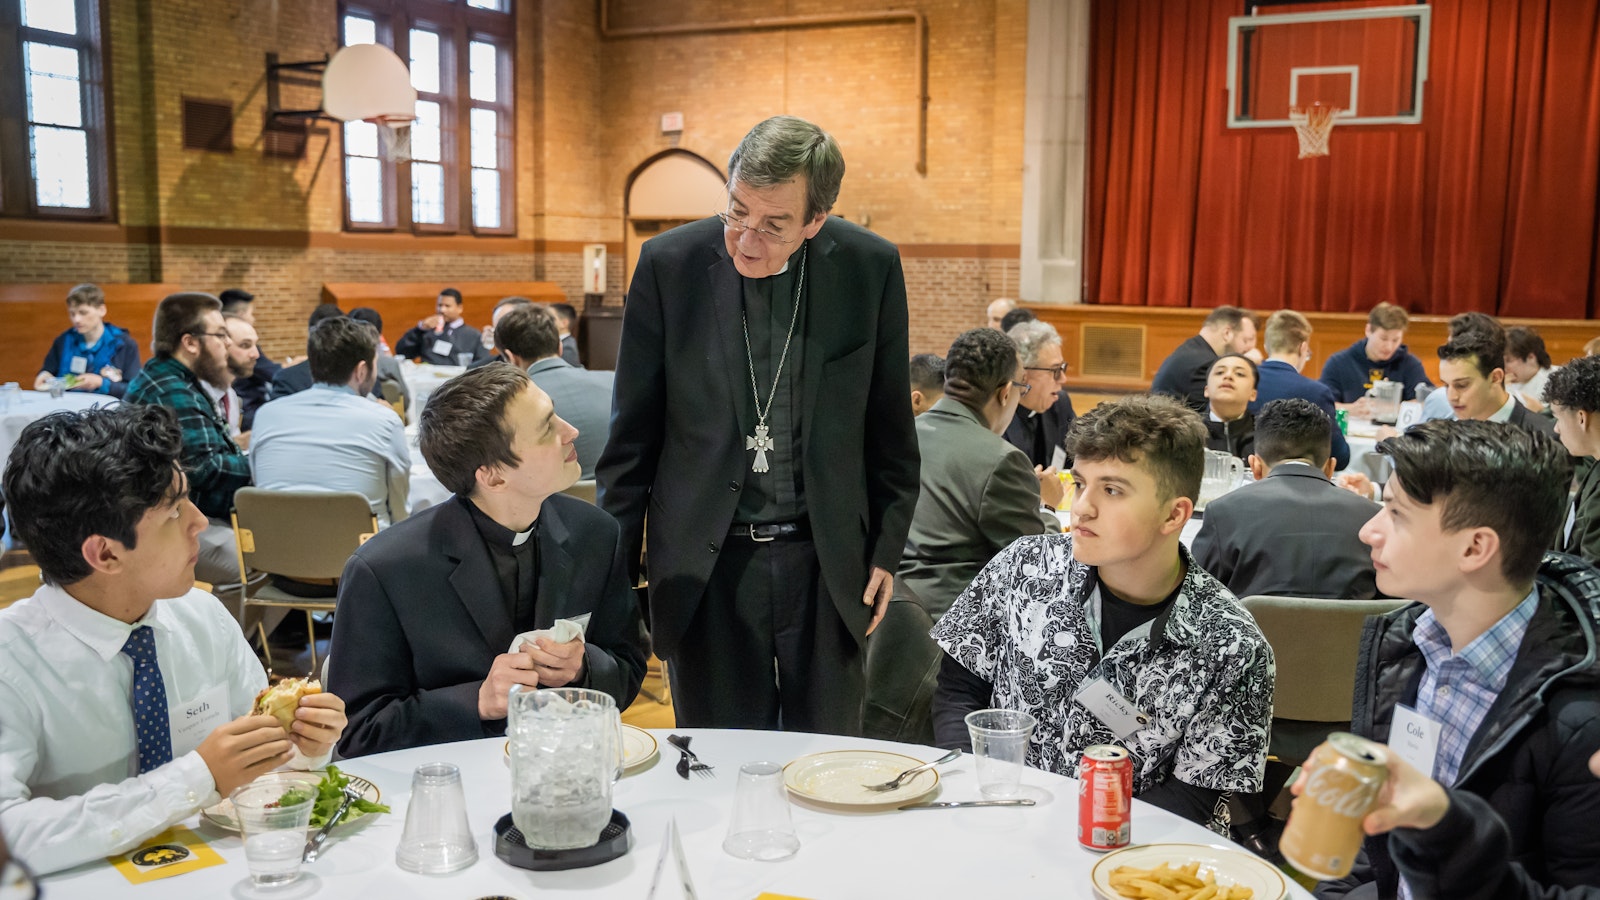 Archbishop Vigneron chats with Fr. Kevin Roelant and young men visiting Sacred Heart Major Seminary for a vocational discernment evening March 28, 2023. (Valaurian Waller | Detroit Catholic)